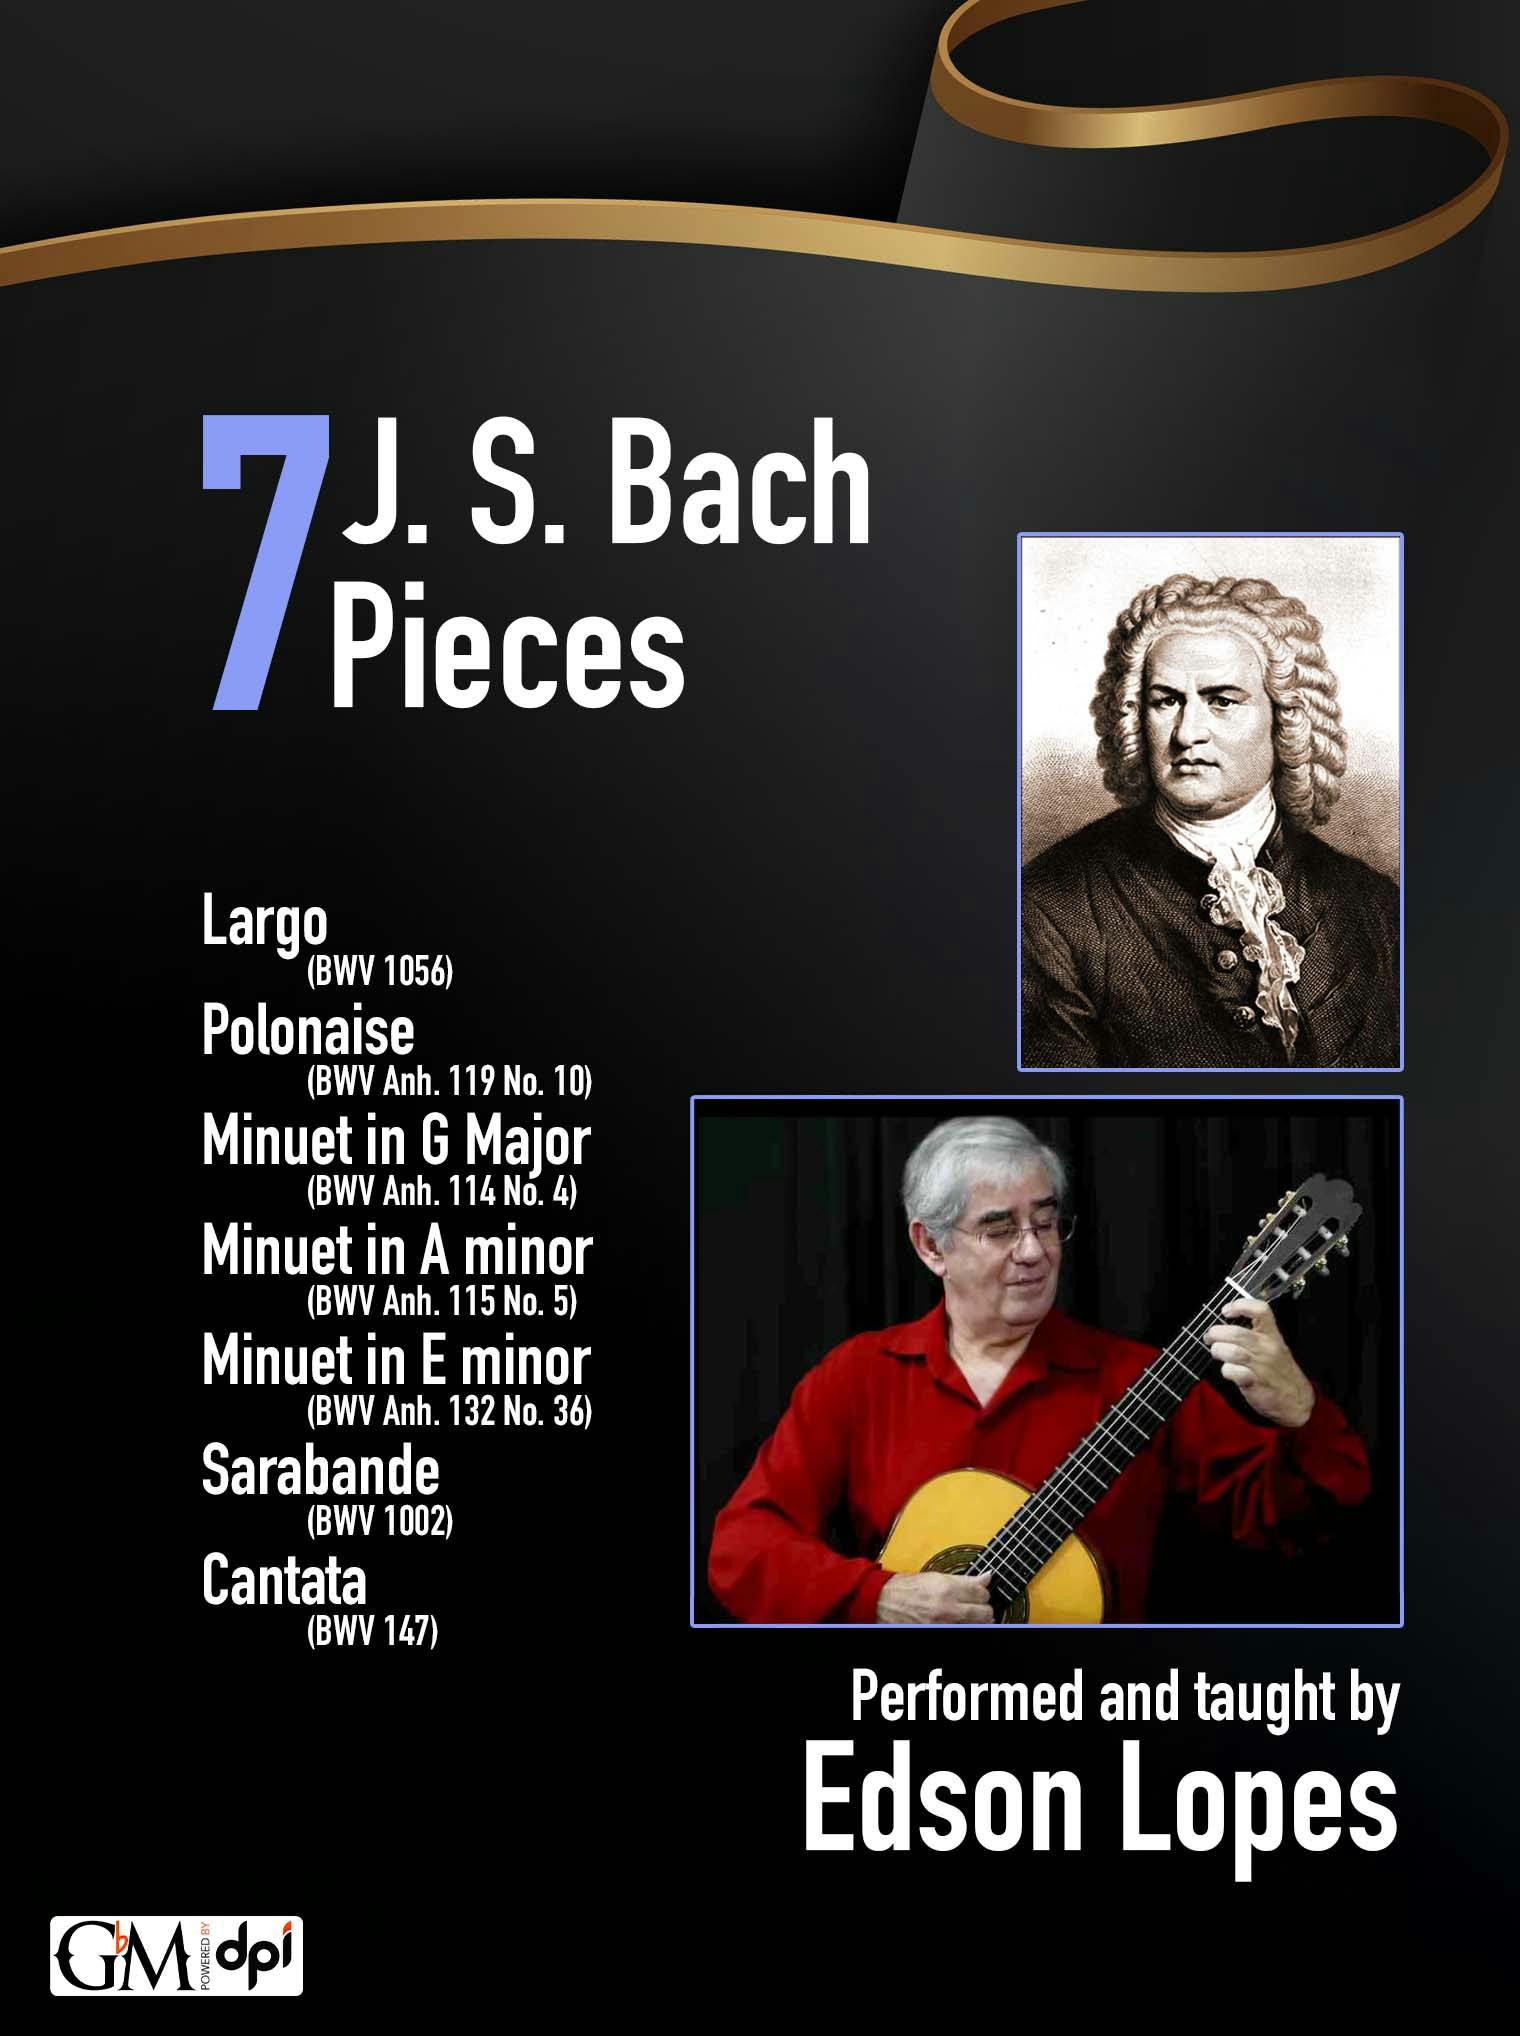 7 J. S. Bach Pieces cover